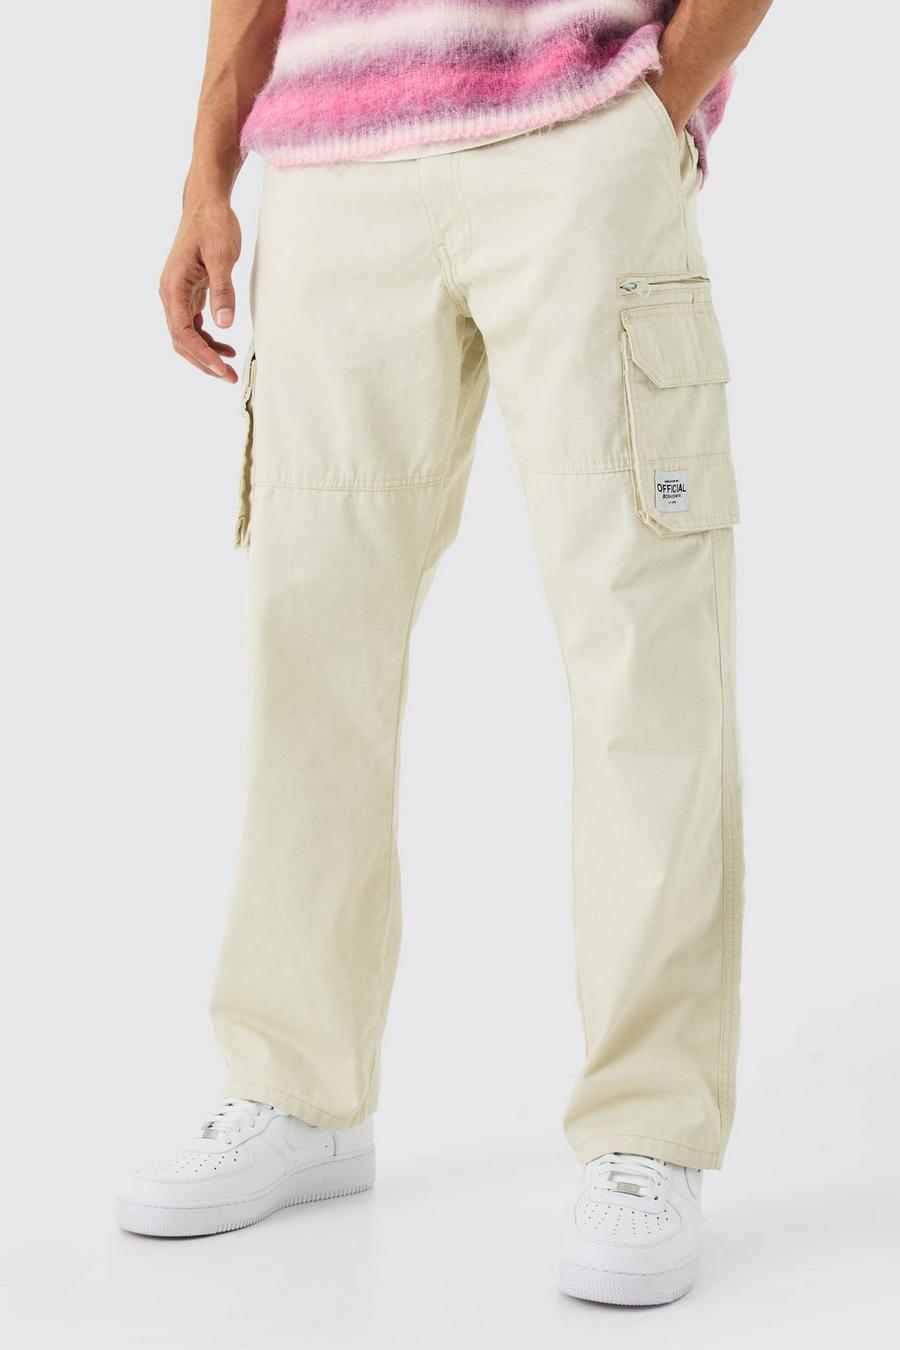 Stone Fixed Ripstop Cargo Zip Pants With Woven Tab